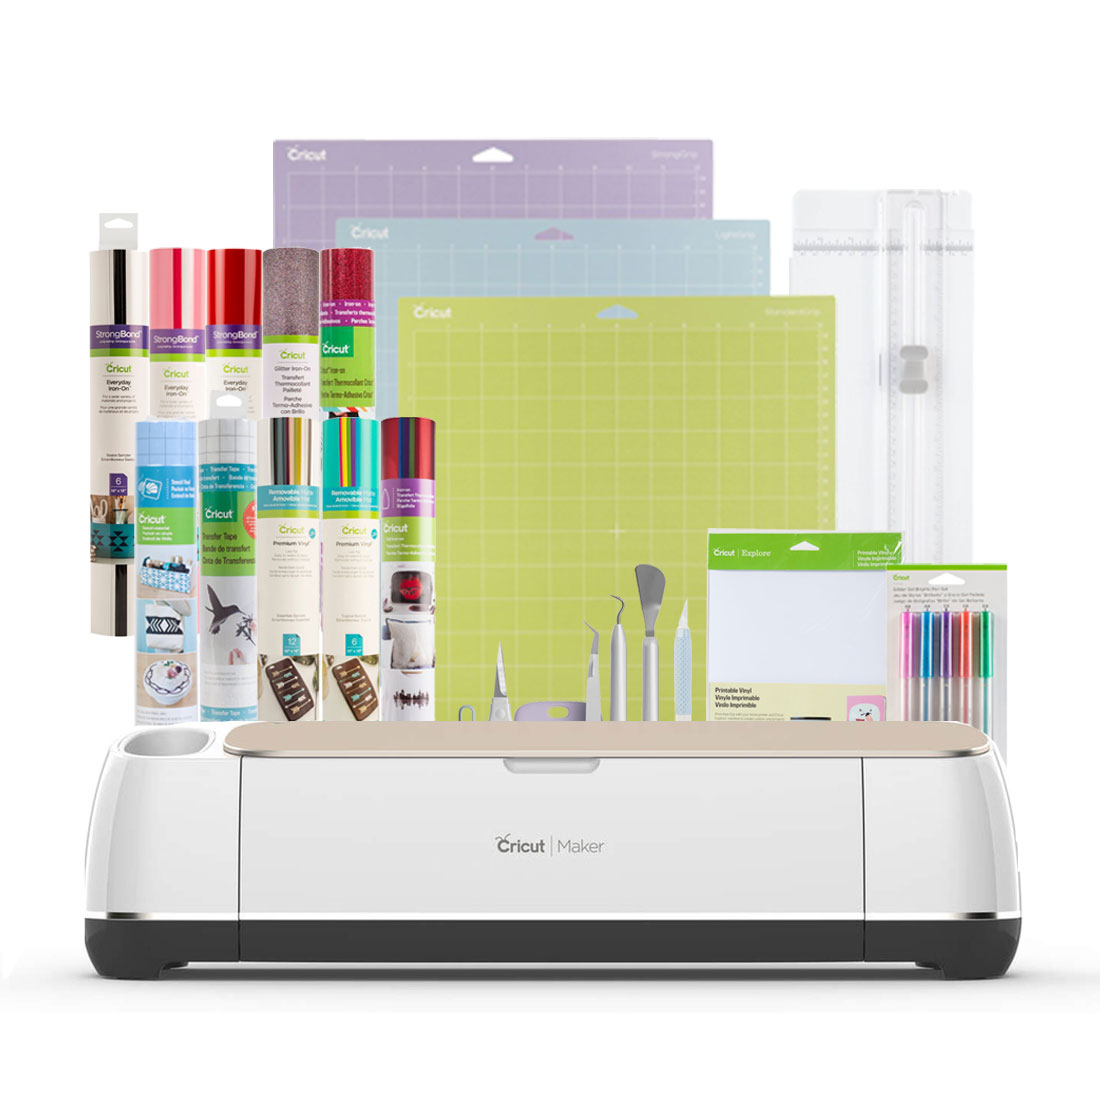 Cricut bundle vs buying separately- worth the value? Would you use all that  it includes? New to cricut. : r/cricut